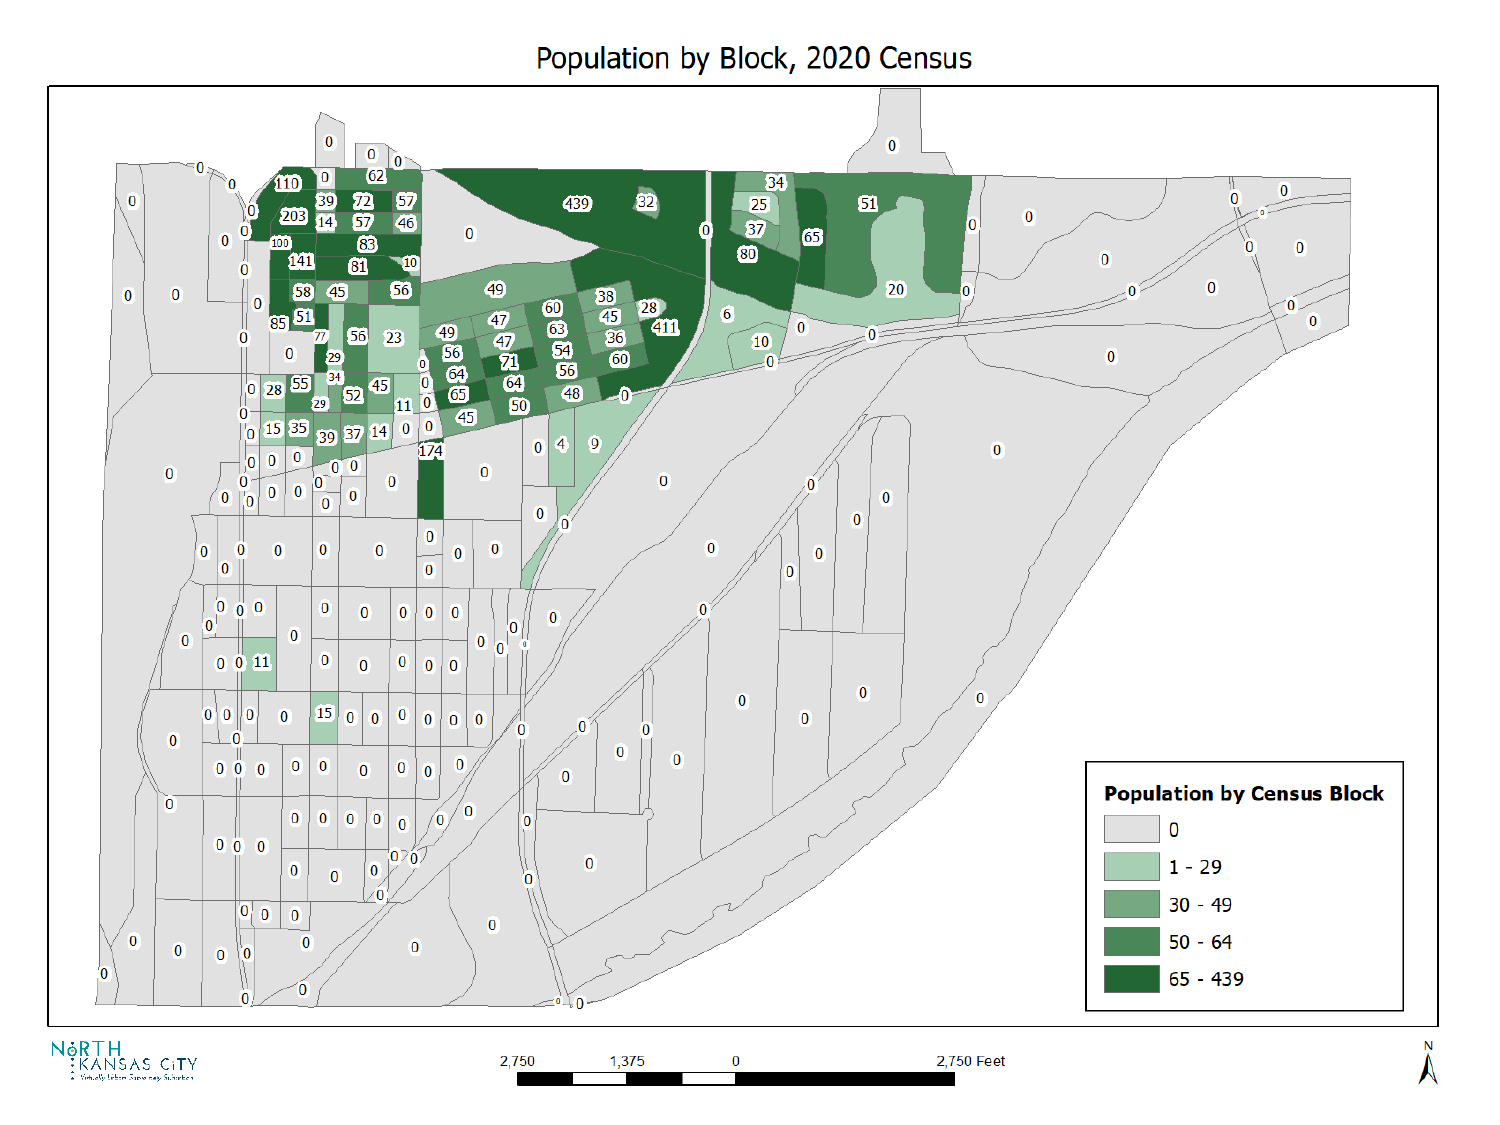 2020 Census Population By Block